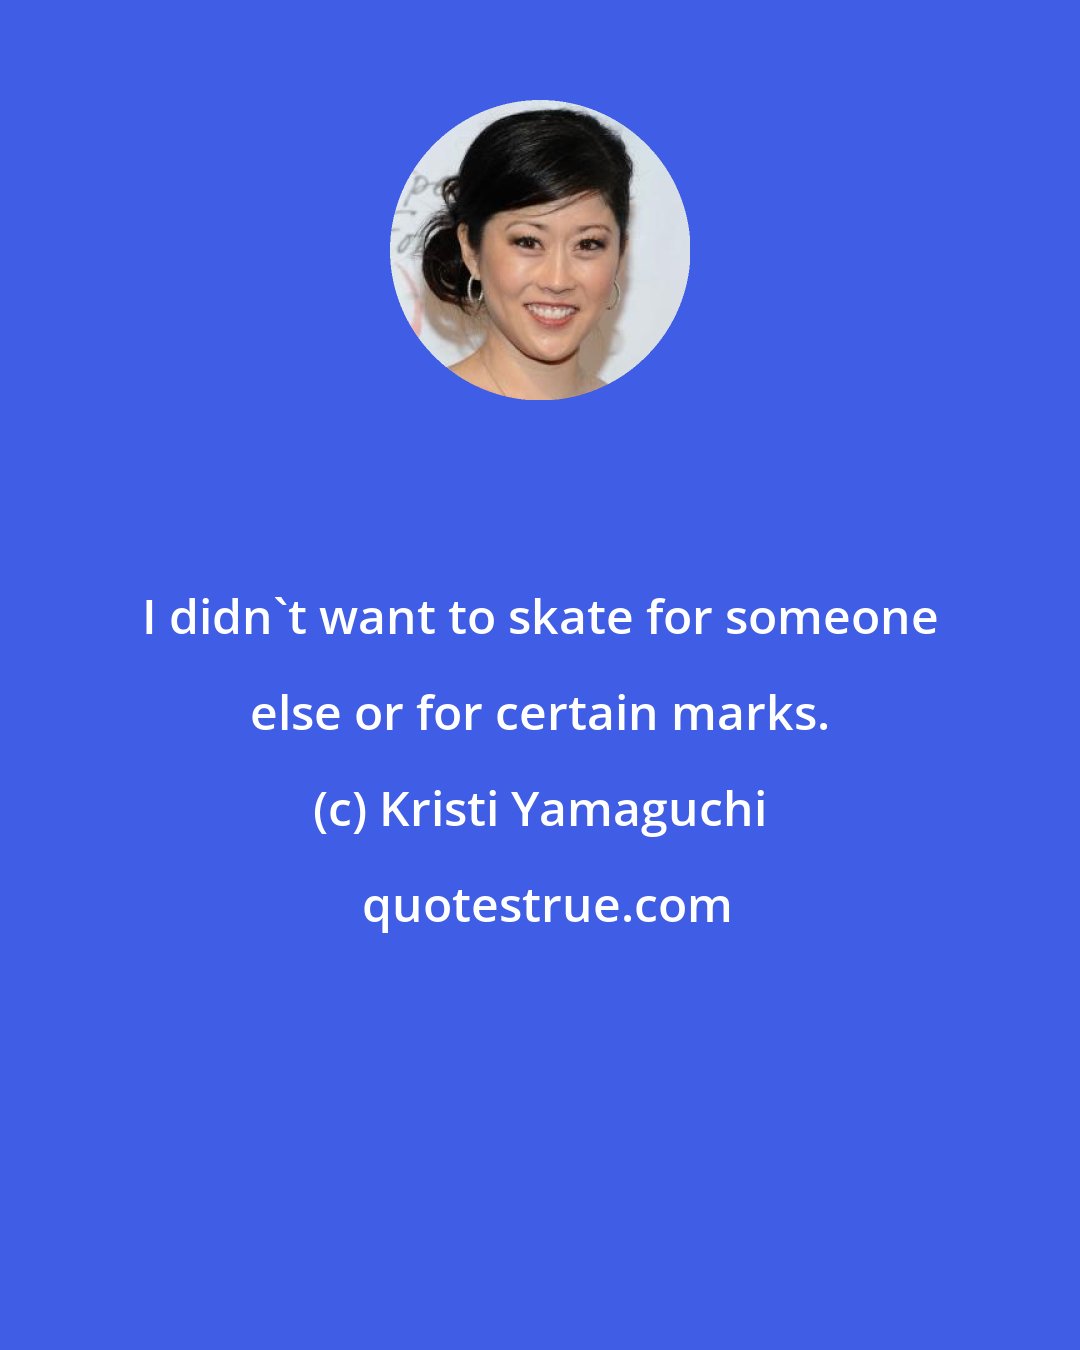 Kristi Yamaguchi: I didn't want to skate for someone else or for certain marks.